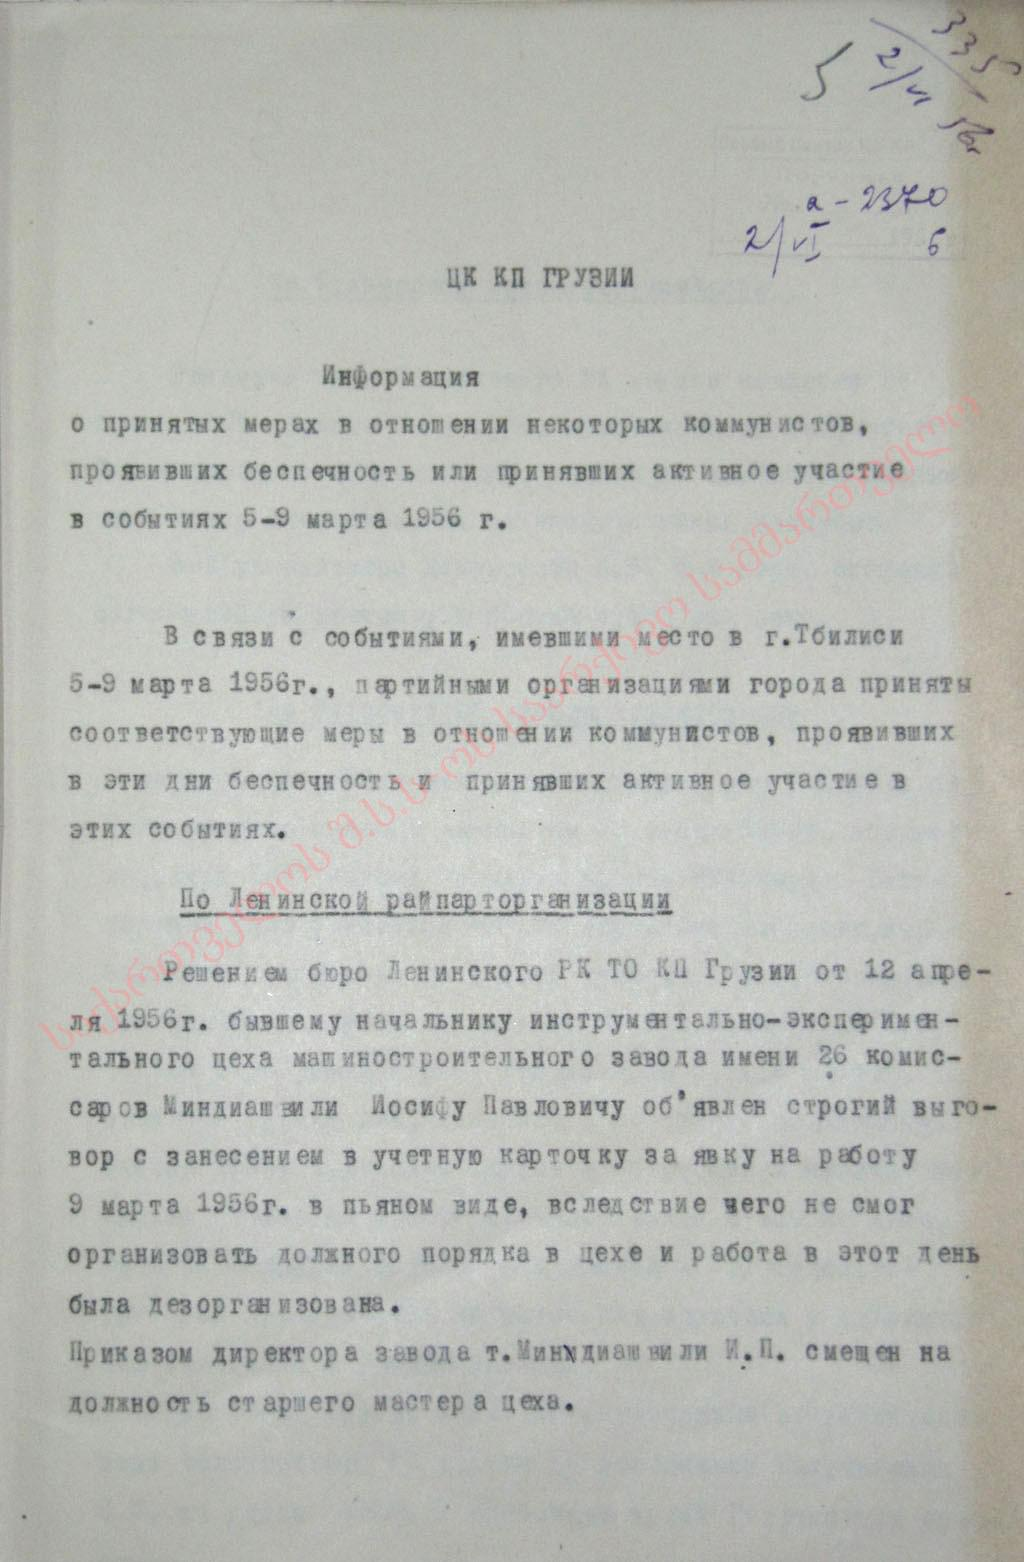  A report of E. Sekhniashvili, a Secretary of the Tbilisi Committee of Communist Party of Georgia